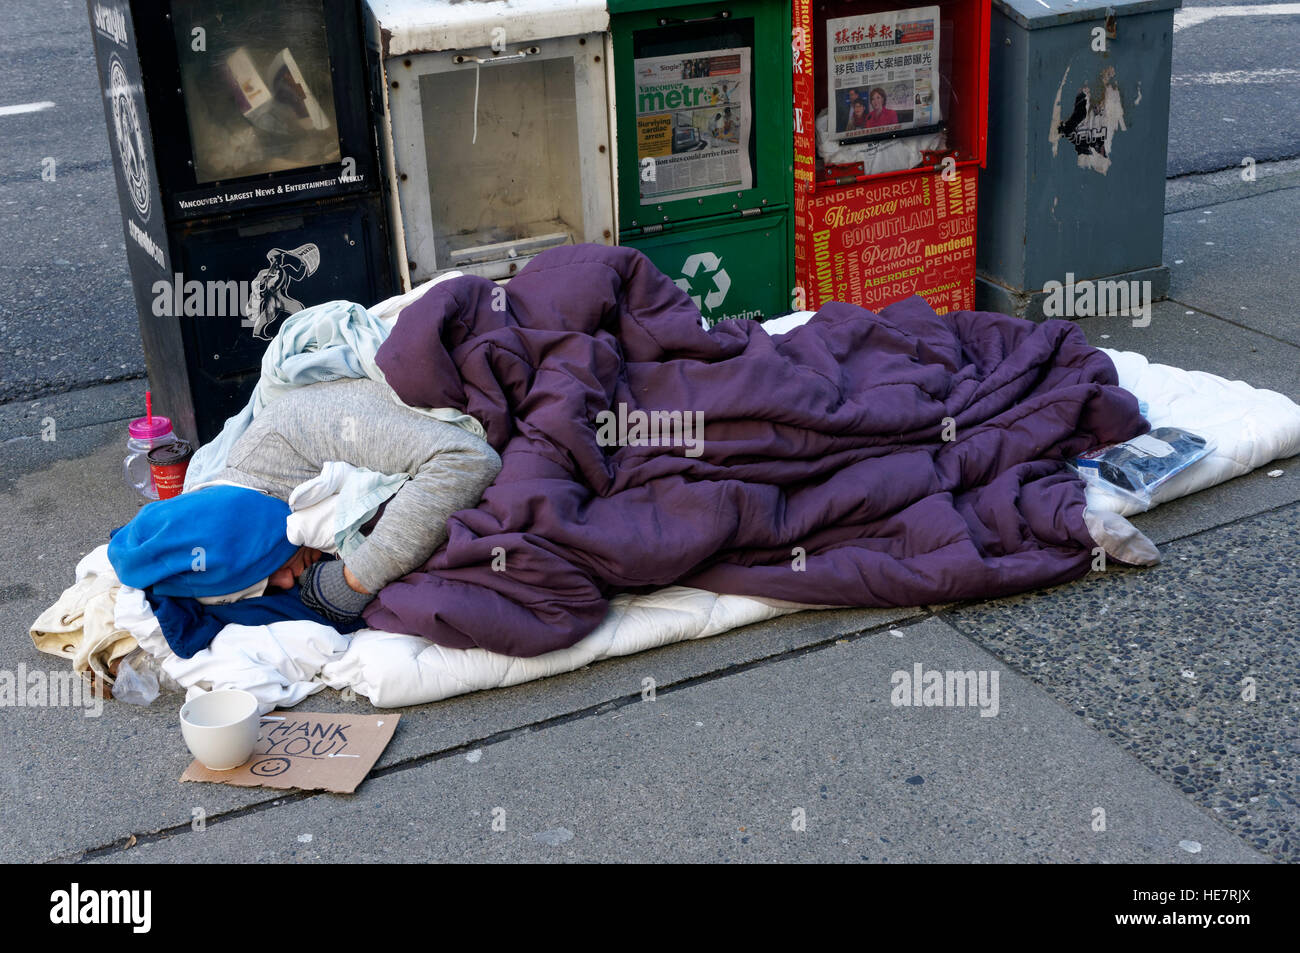 A homeless man sleeping on the sidewalk in cold weather, Vancouver, British Columbia, Canada Stock Photo